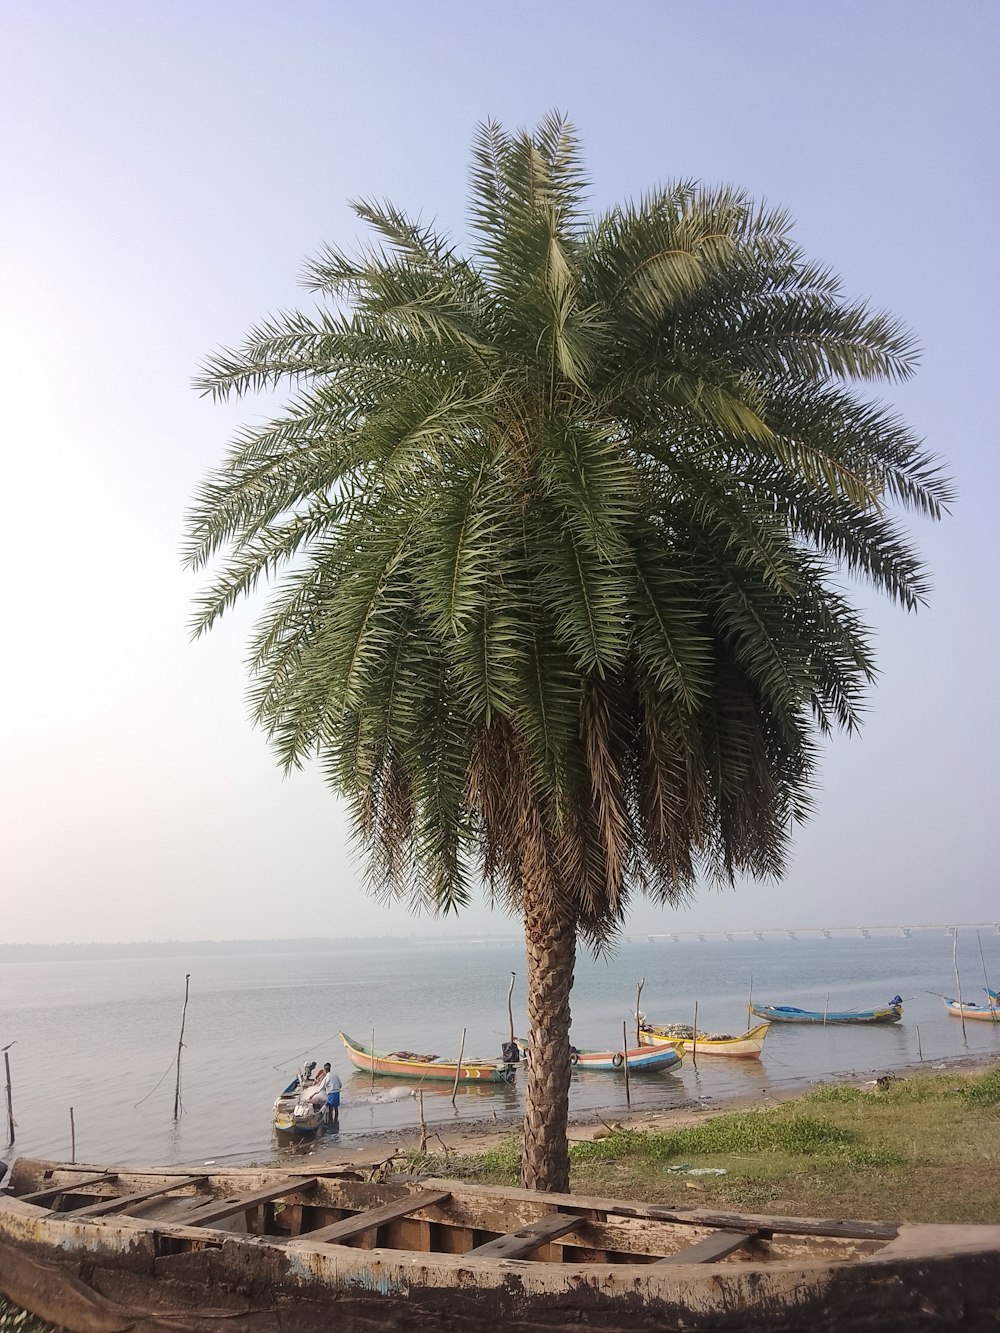 a palm tree next to a beach with boats in the water